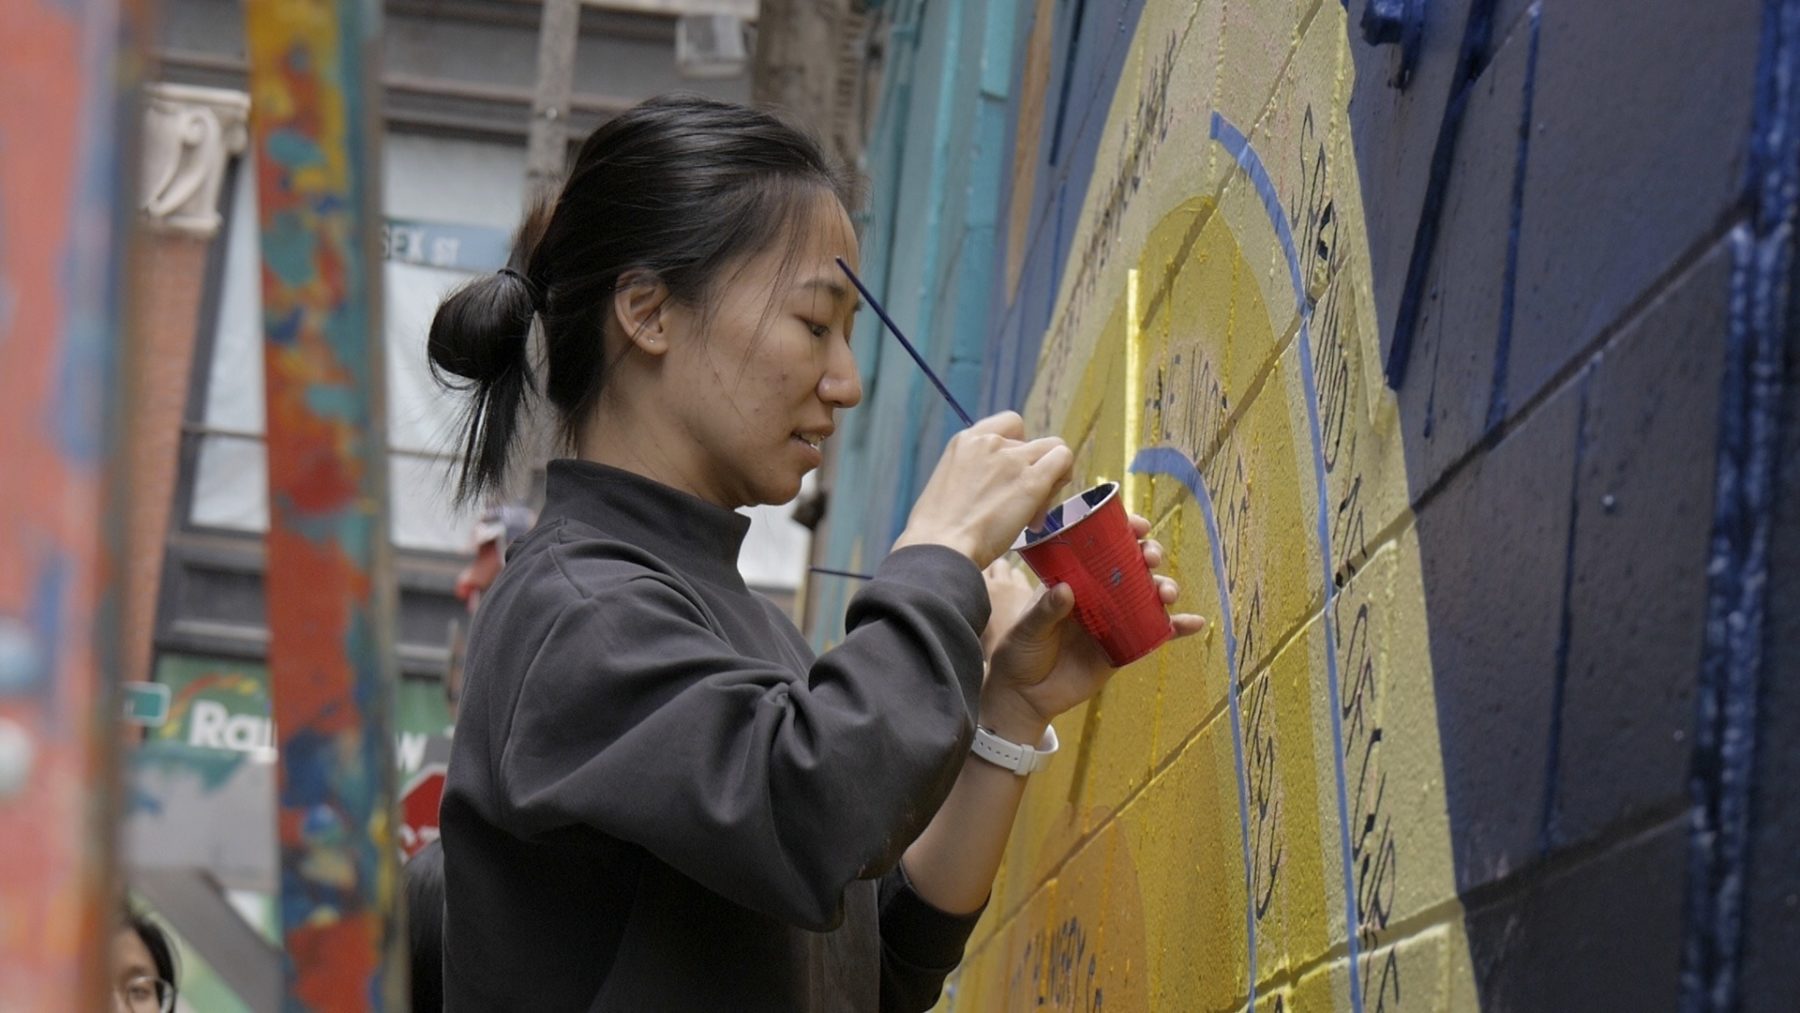 Volunteer dips paintbrush in cup of paint while helping with Chinatown mural